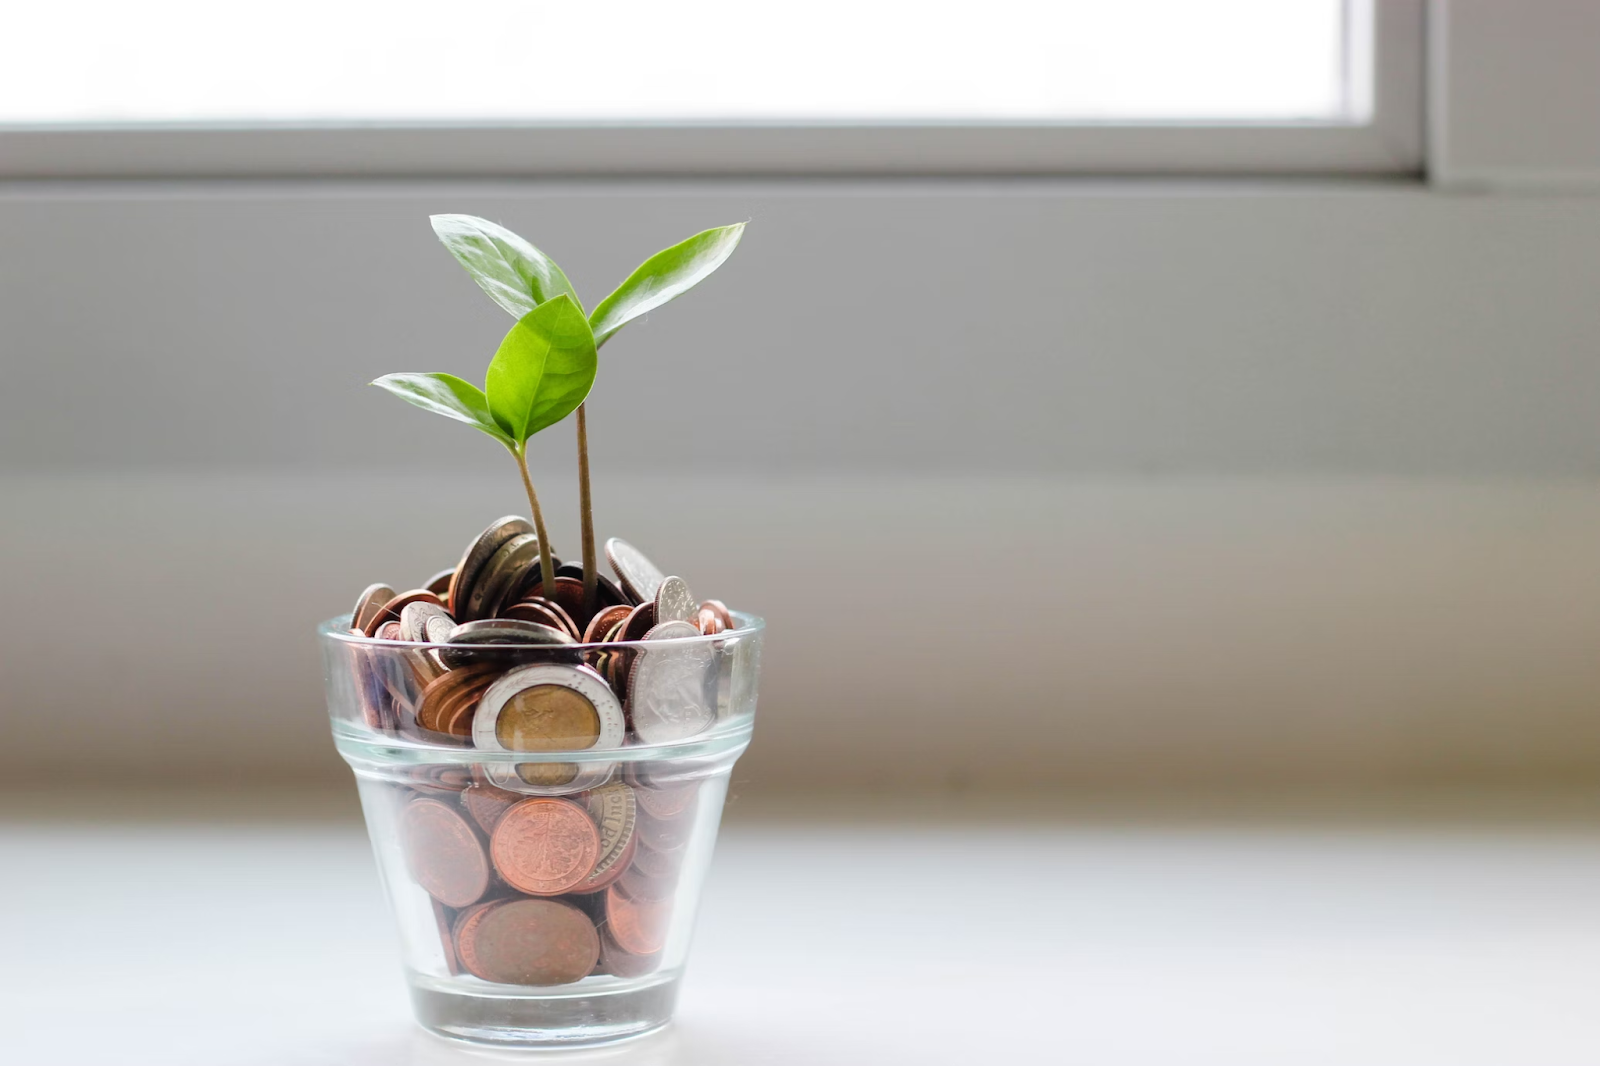 seedlings in a pot of coins